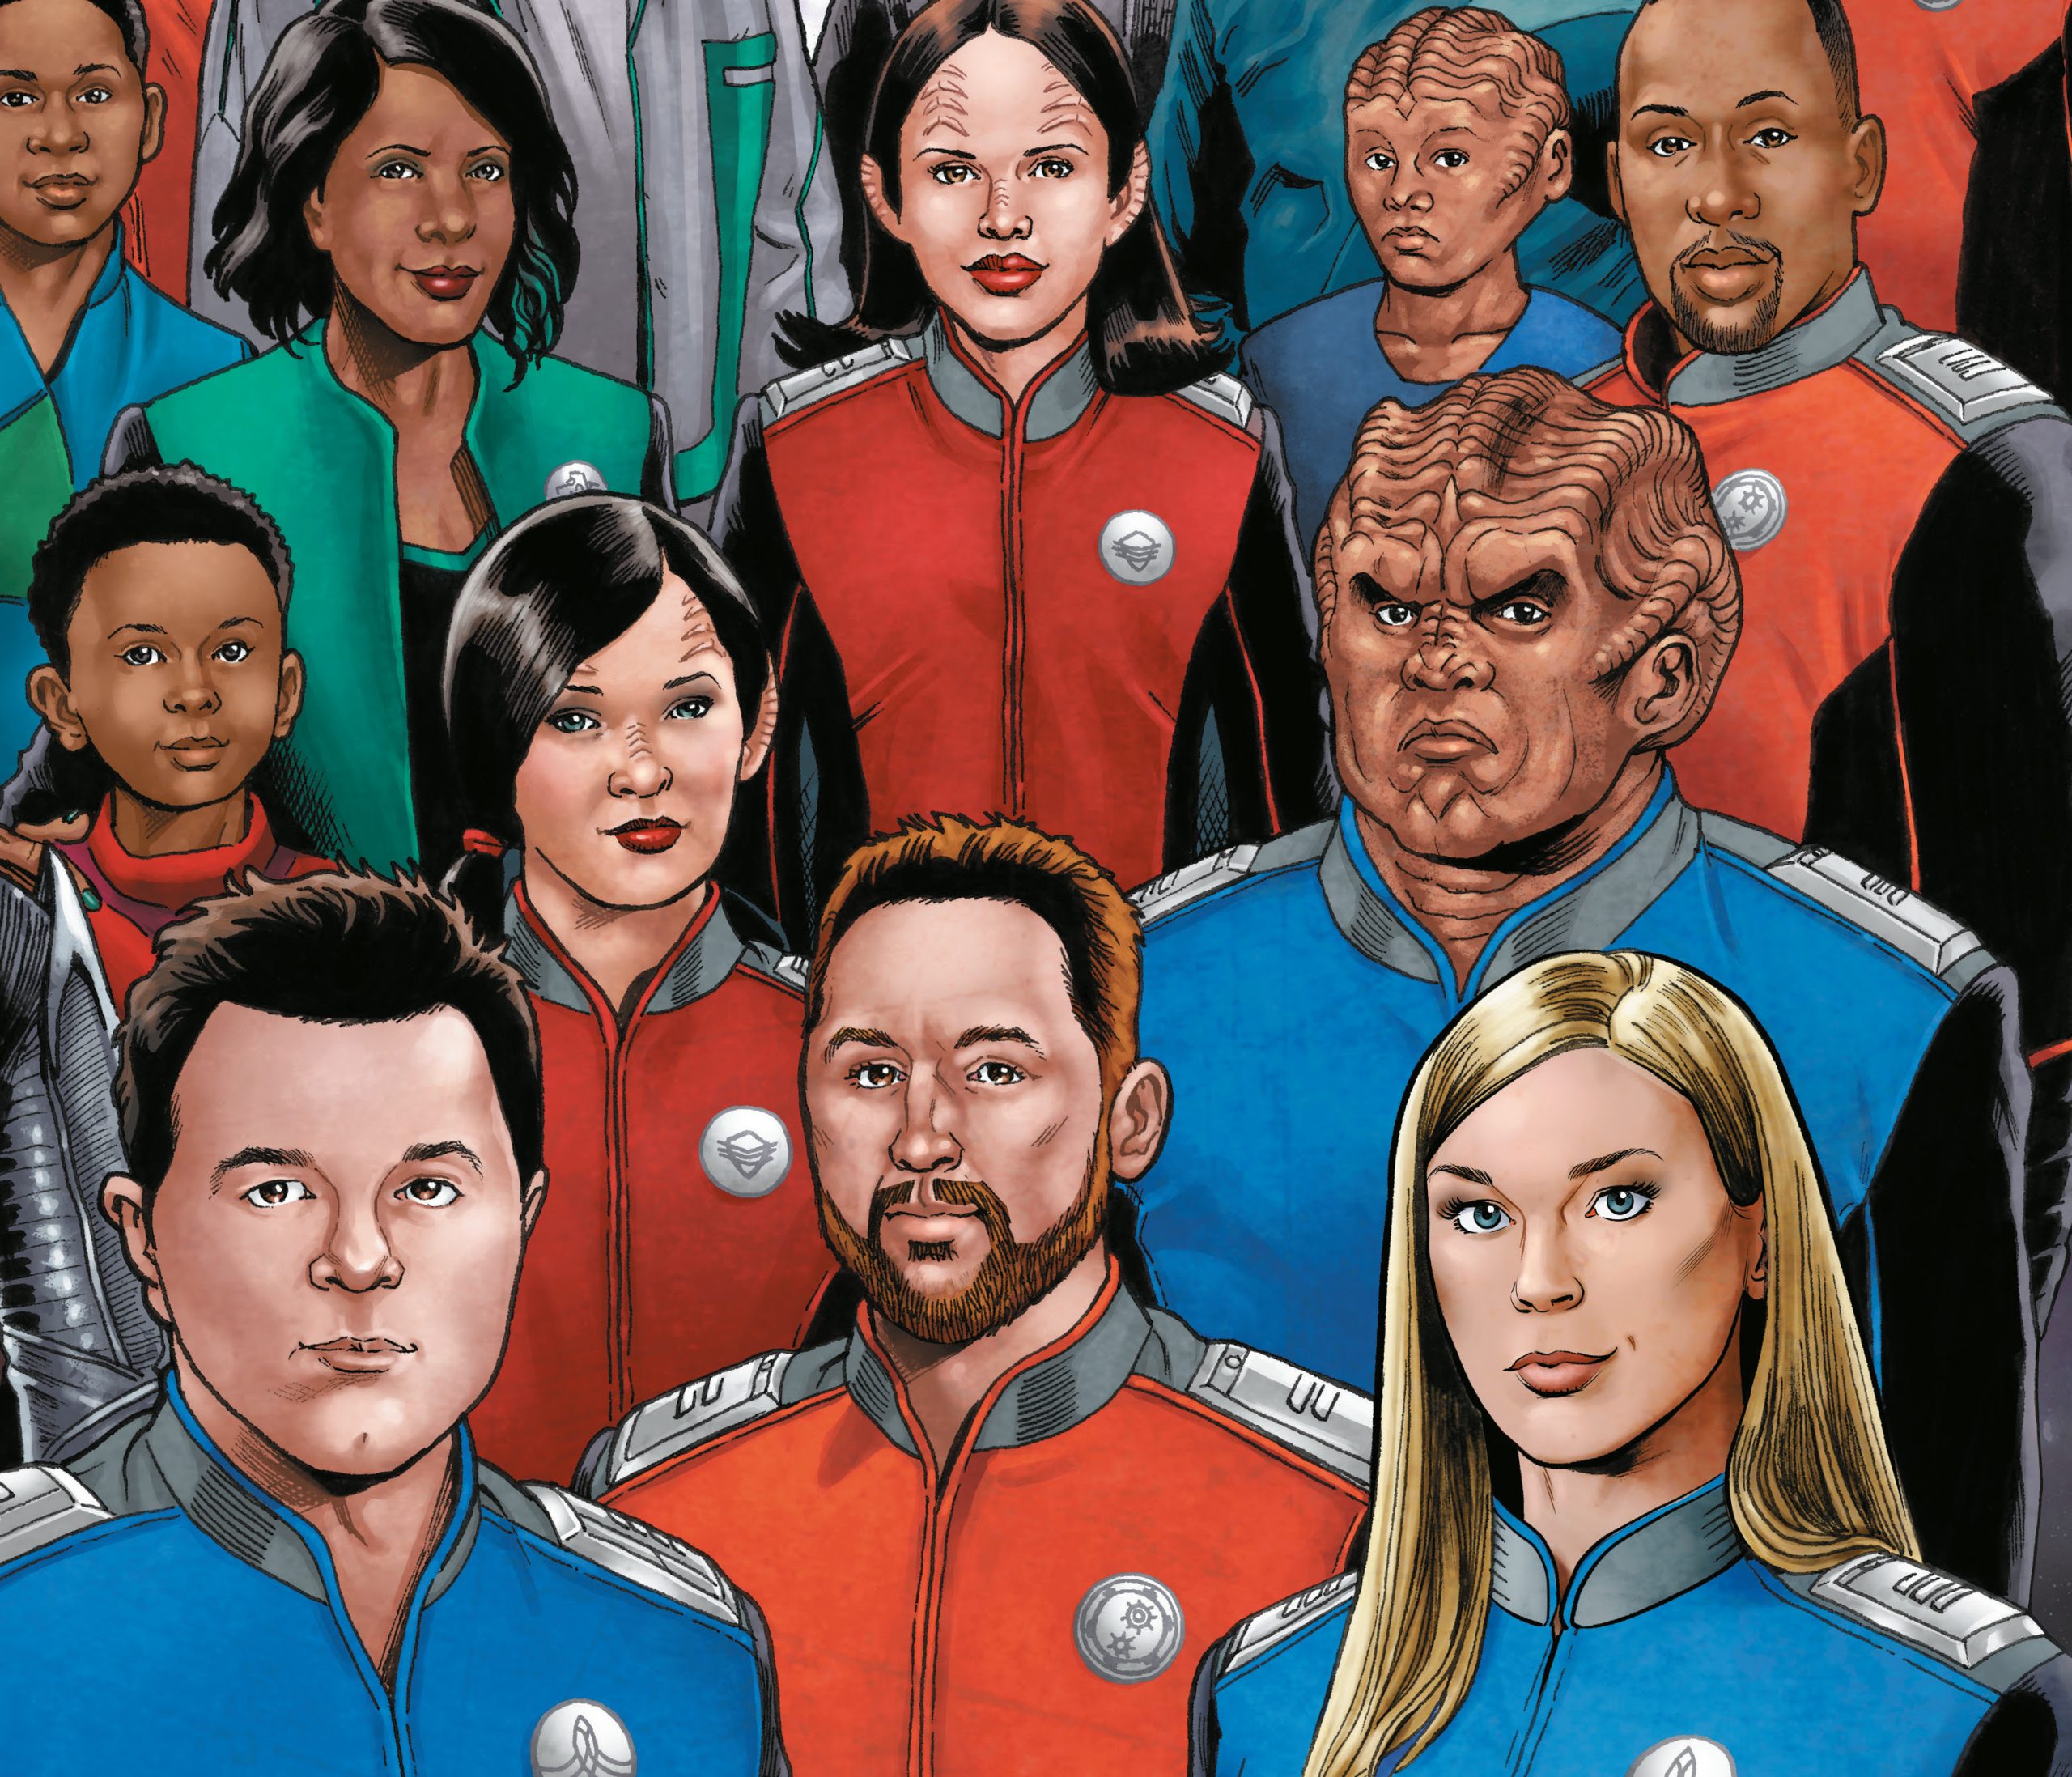 'The Orville' gets 'The Orville Library Edition' Volume 1 edition